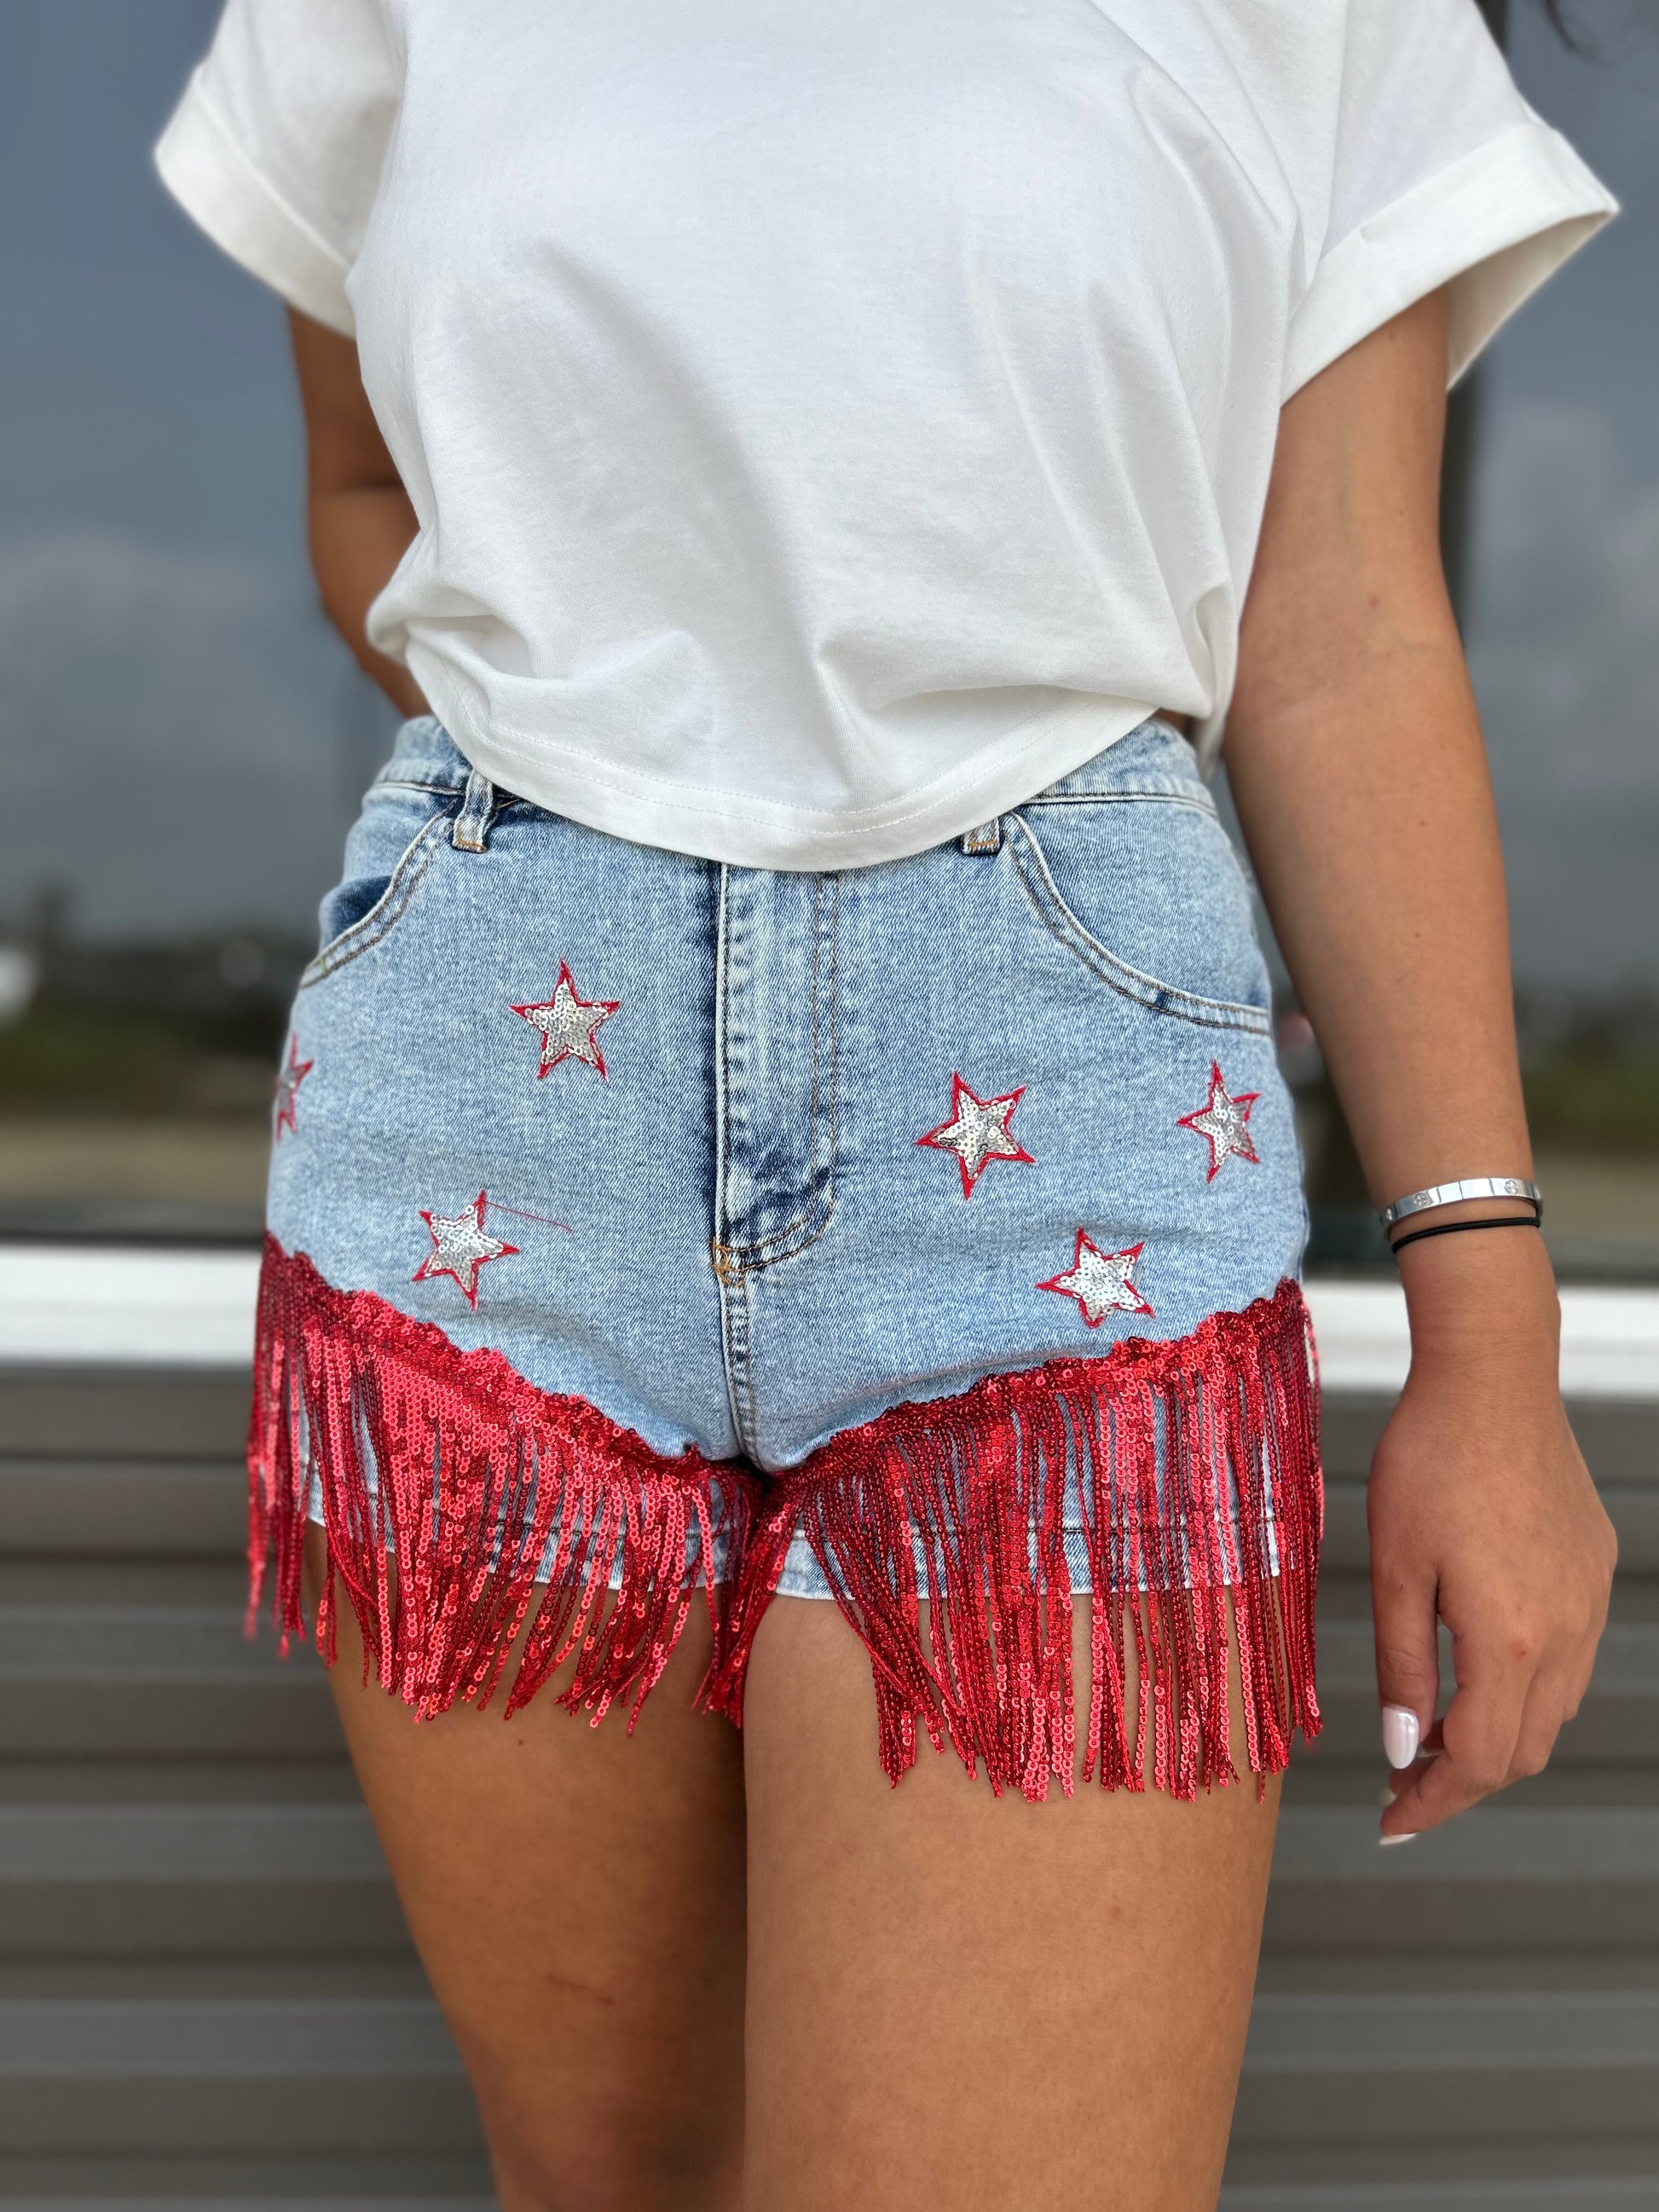 Star Patch With Red Fringe Shorts - Jolie Femme Boutique